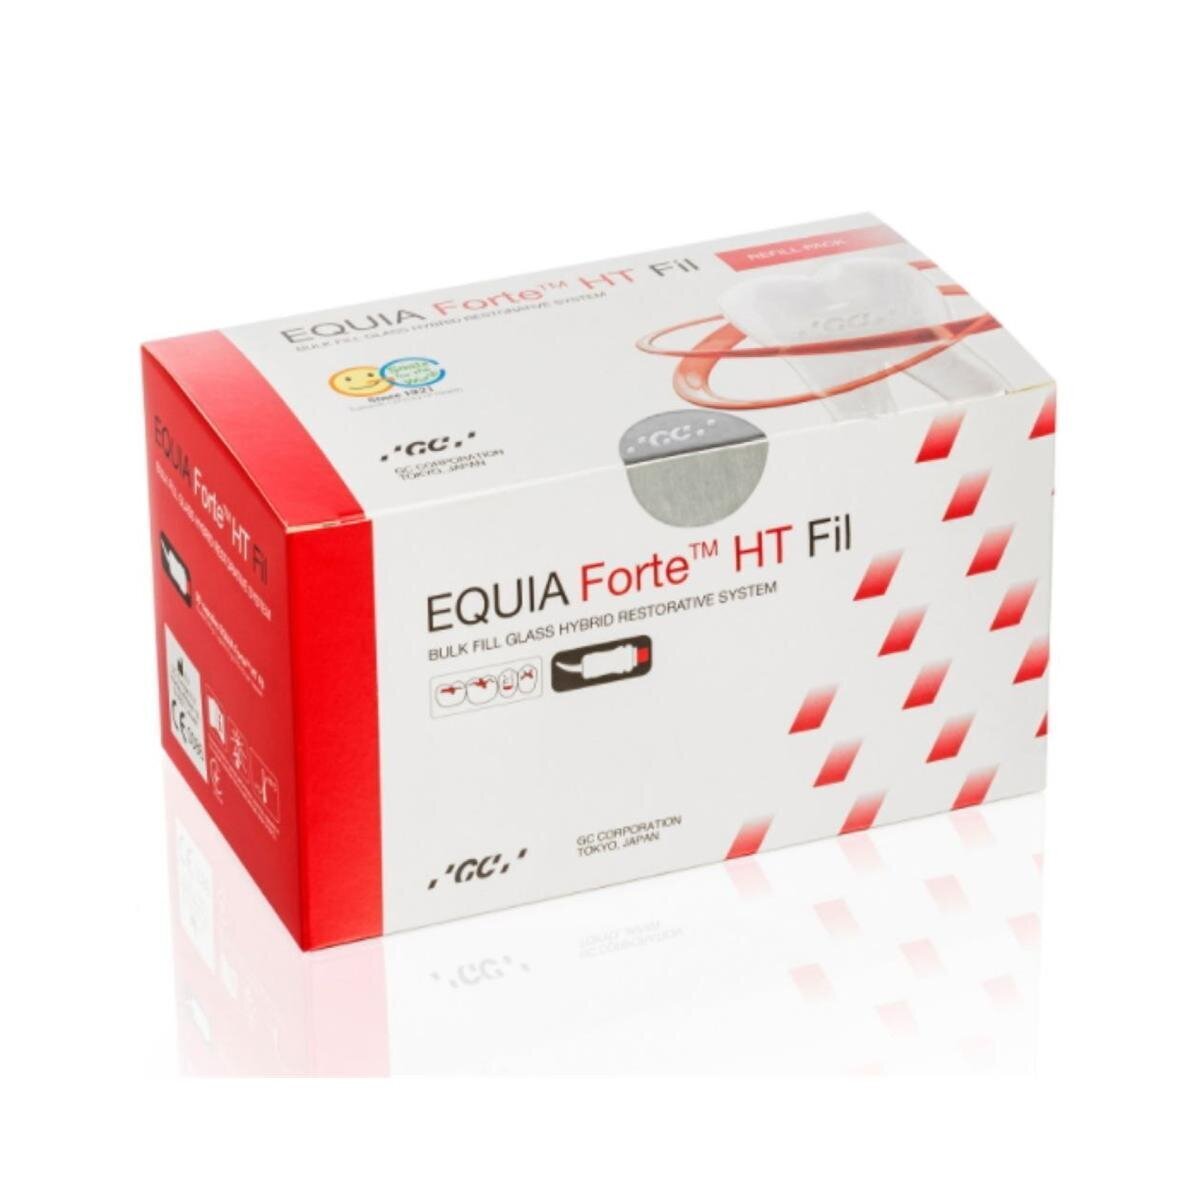 EQUIA Forte HT Refill Pack B3